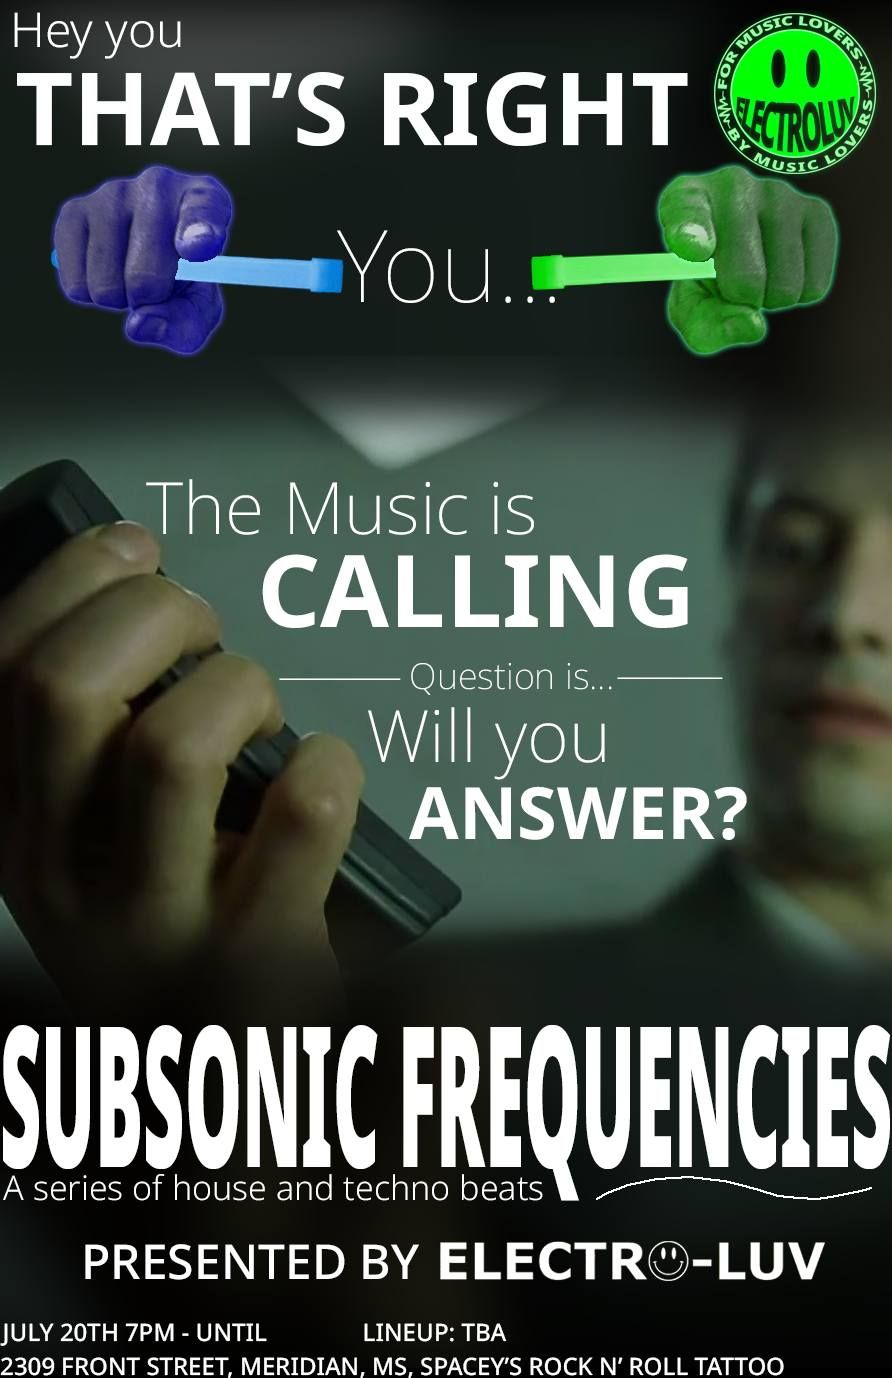 Electroluv presents: Subsonic Frequencies: A night of house and techno